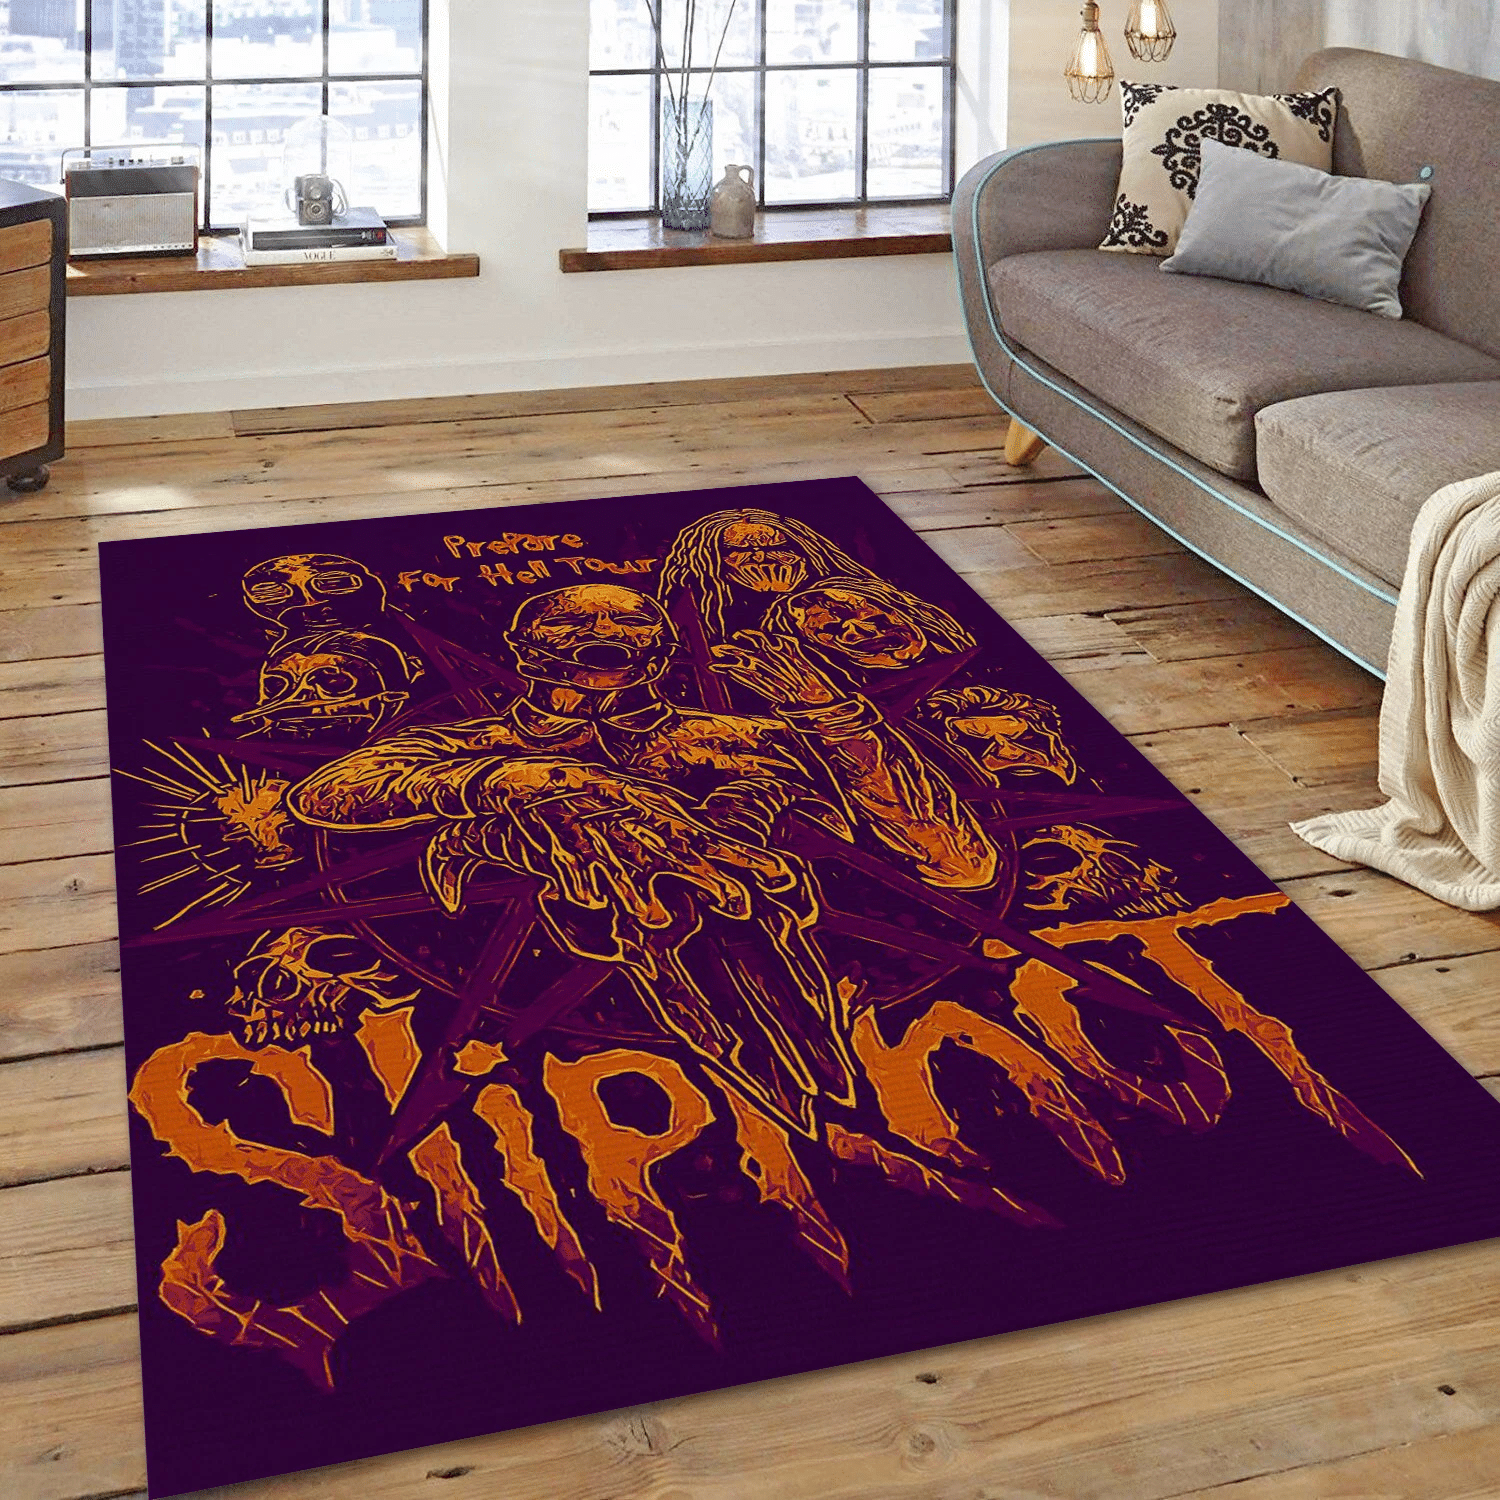 Slipknot Purple And Gold Music Area Rug For Christmas, Living Room Rug - Floor Decor - Indoor Outdoor Rugs